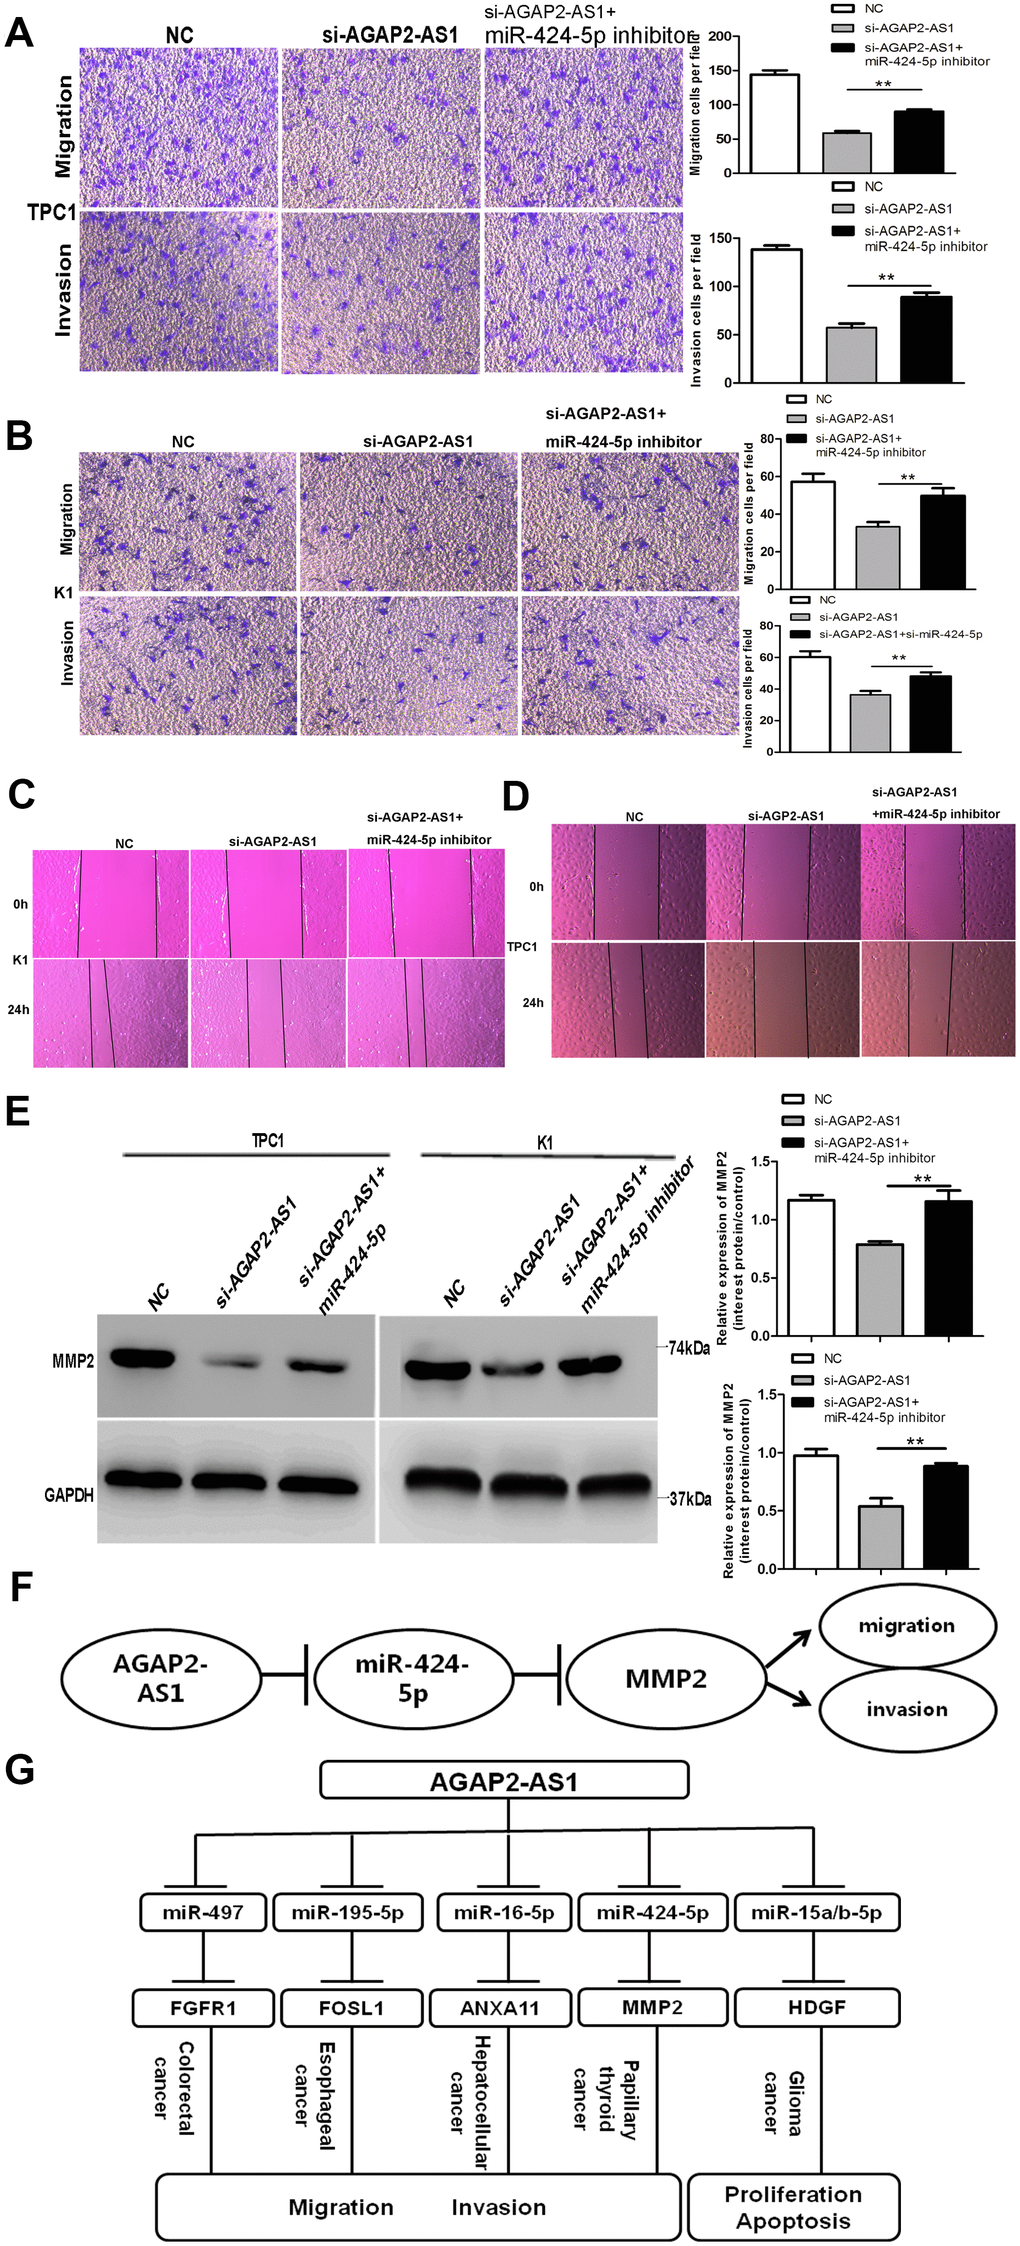 Downregulation of miR-424-5p partly rescues si-AGAP2-AS1 mediated inhibition of invasion and migration in PTC cells. (A, B) Trans-well assays of PTC cell migration and invasion after transfection with si-AGAP2-AS1, or a co-transfection with miR-424-5p inhibitor and si-AGAP2-AS1 or NC. Data are presented as the mean ± S.D., analyzed using an independent samples t-test; **P C, D) Wound-healing assay of PTC cell migration and invasion after transfection with si-AGAP2-AS1, or co-transfection with miR-424-5p inhibitor and si-AGAP2-AS1 or NC. (E) Western blotting of MMP2 after transfection with si-AGAP2-AS1 or co-transfection with miR-424-5p inhibitor and si-AGAP2-AS1 or NC. Data are presented as the mean ± S.D., analyzed using an independent samples t-test; **P vs. the si-AGAP2-AS1 group. (F) Schematic illustration of the proposed function of AGAP2-AS1 in PTC. AGAP2-AS1 functions as a competing endogenous RNA that upregulates MMP2 expression and promotes PTC progression by sponging miR-424-5p. (G) AGAP2-AS1 played a role as ceRNA in different cancers.